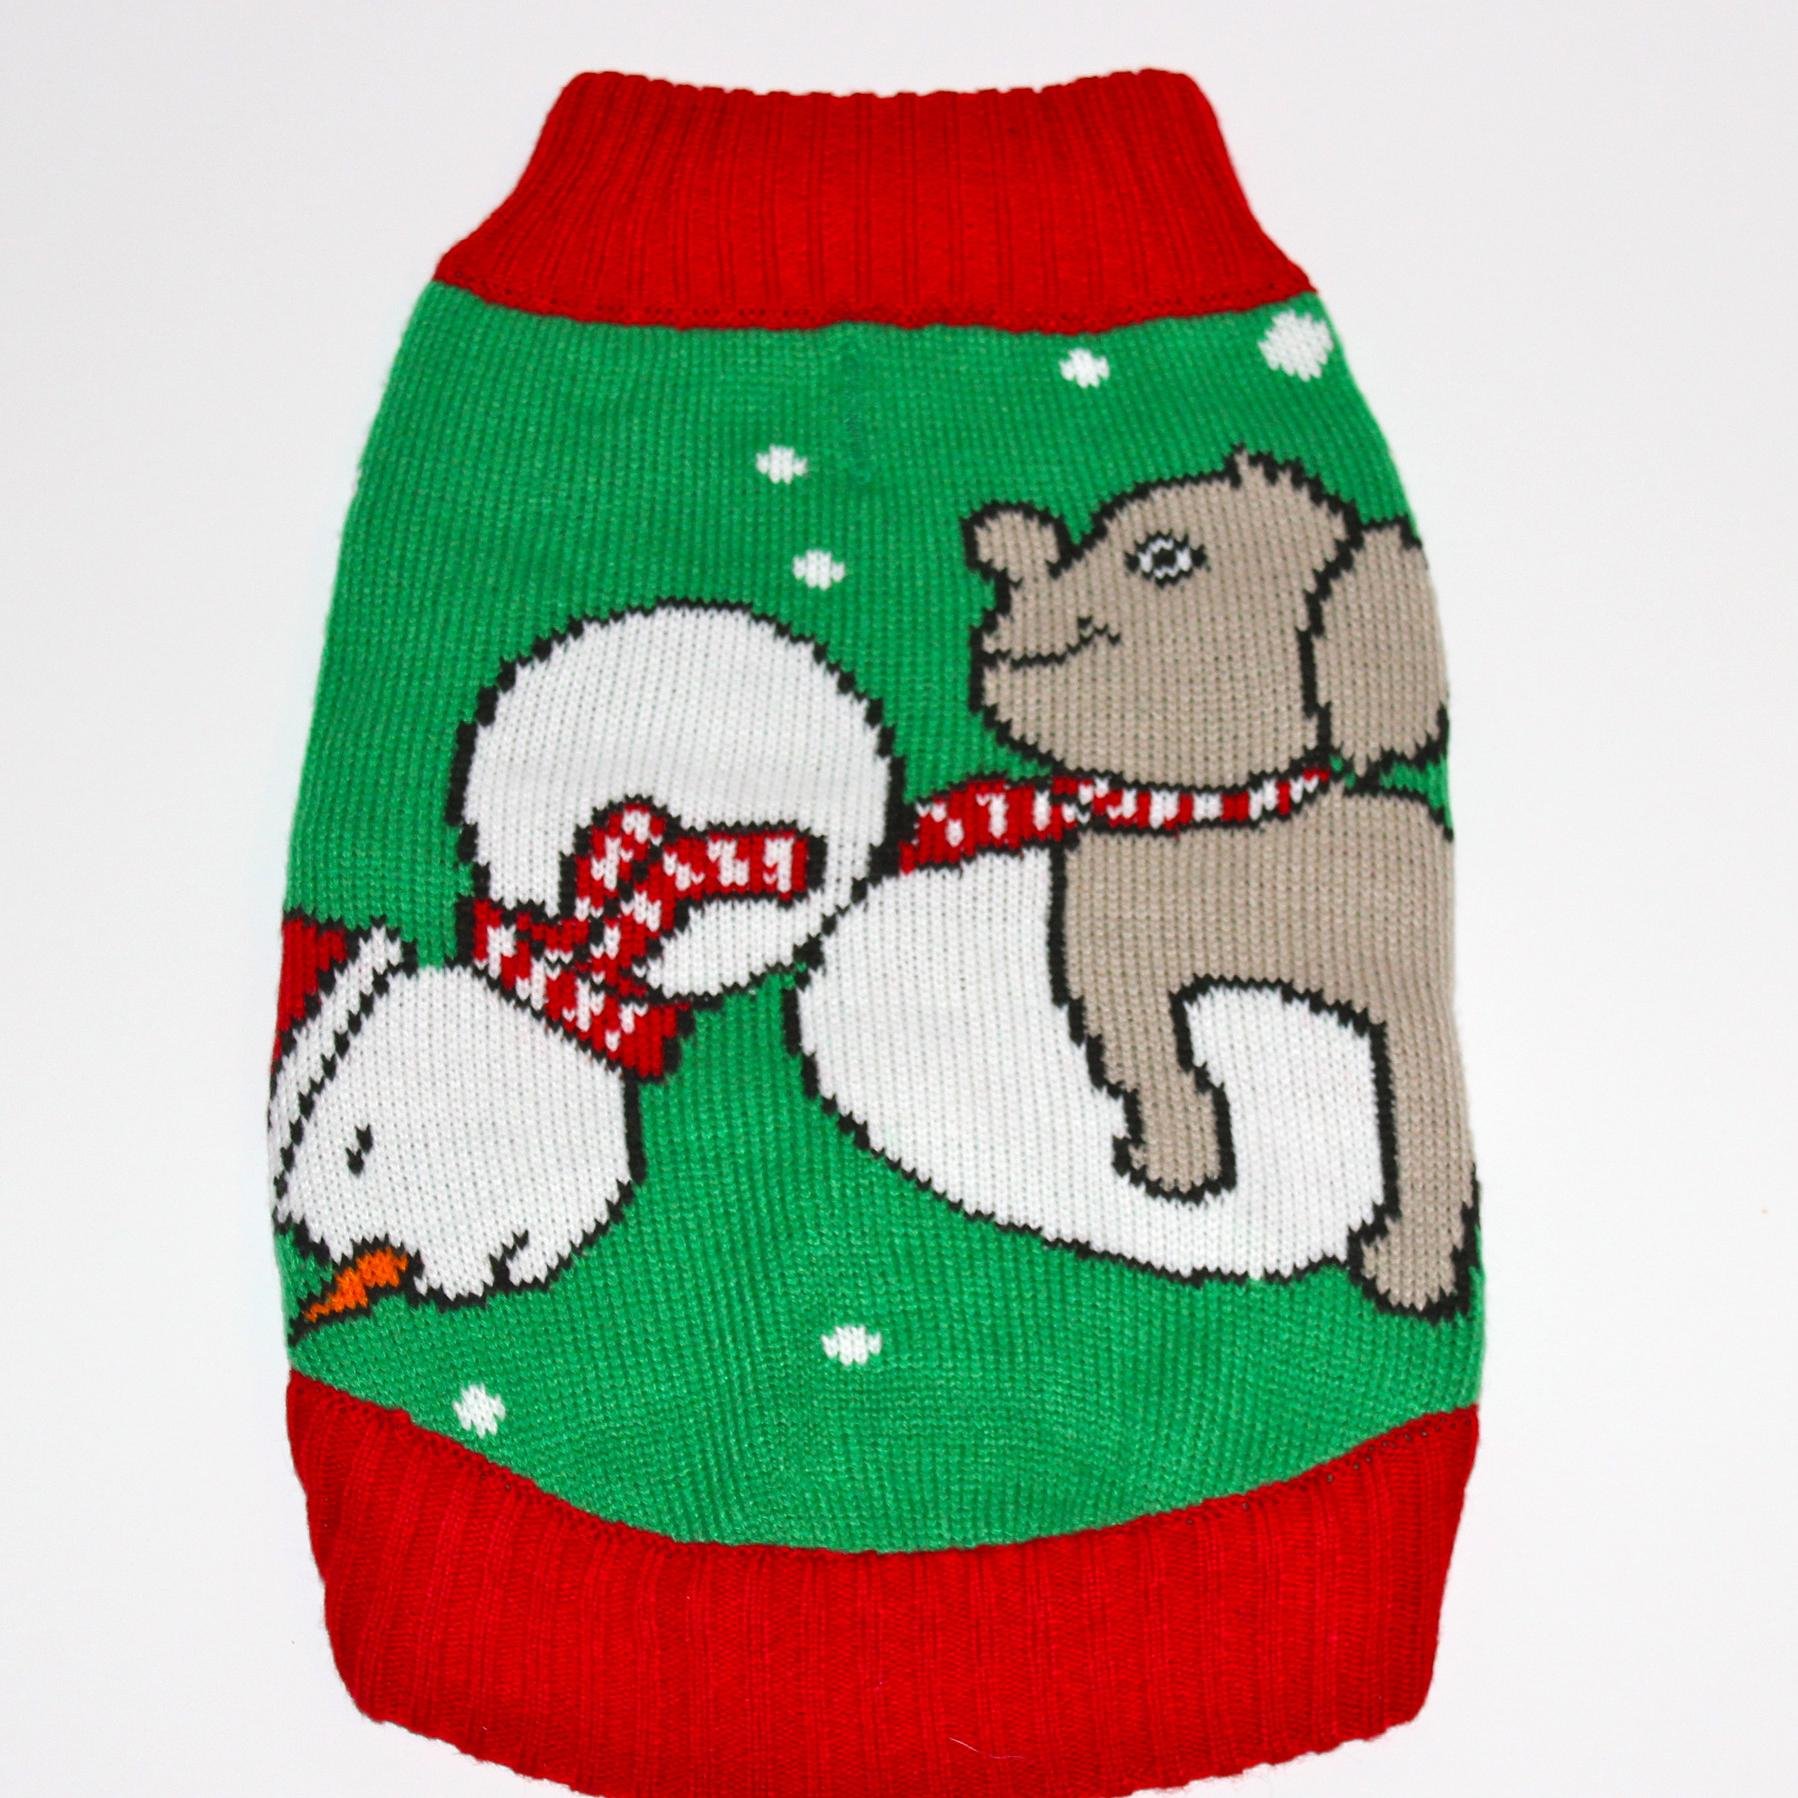 Dog themed Christmas sweaters with matching styles for men, women and dogs.